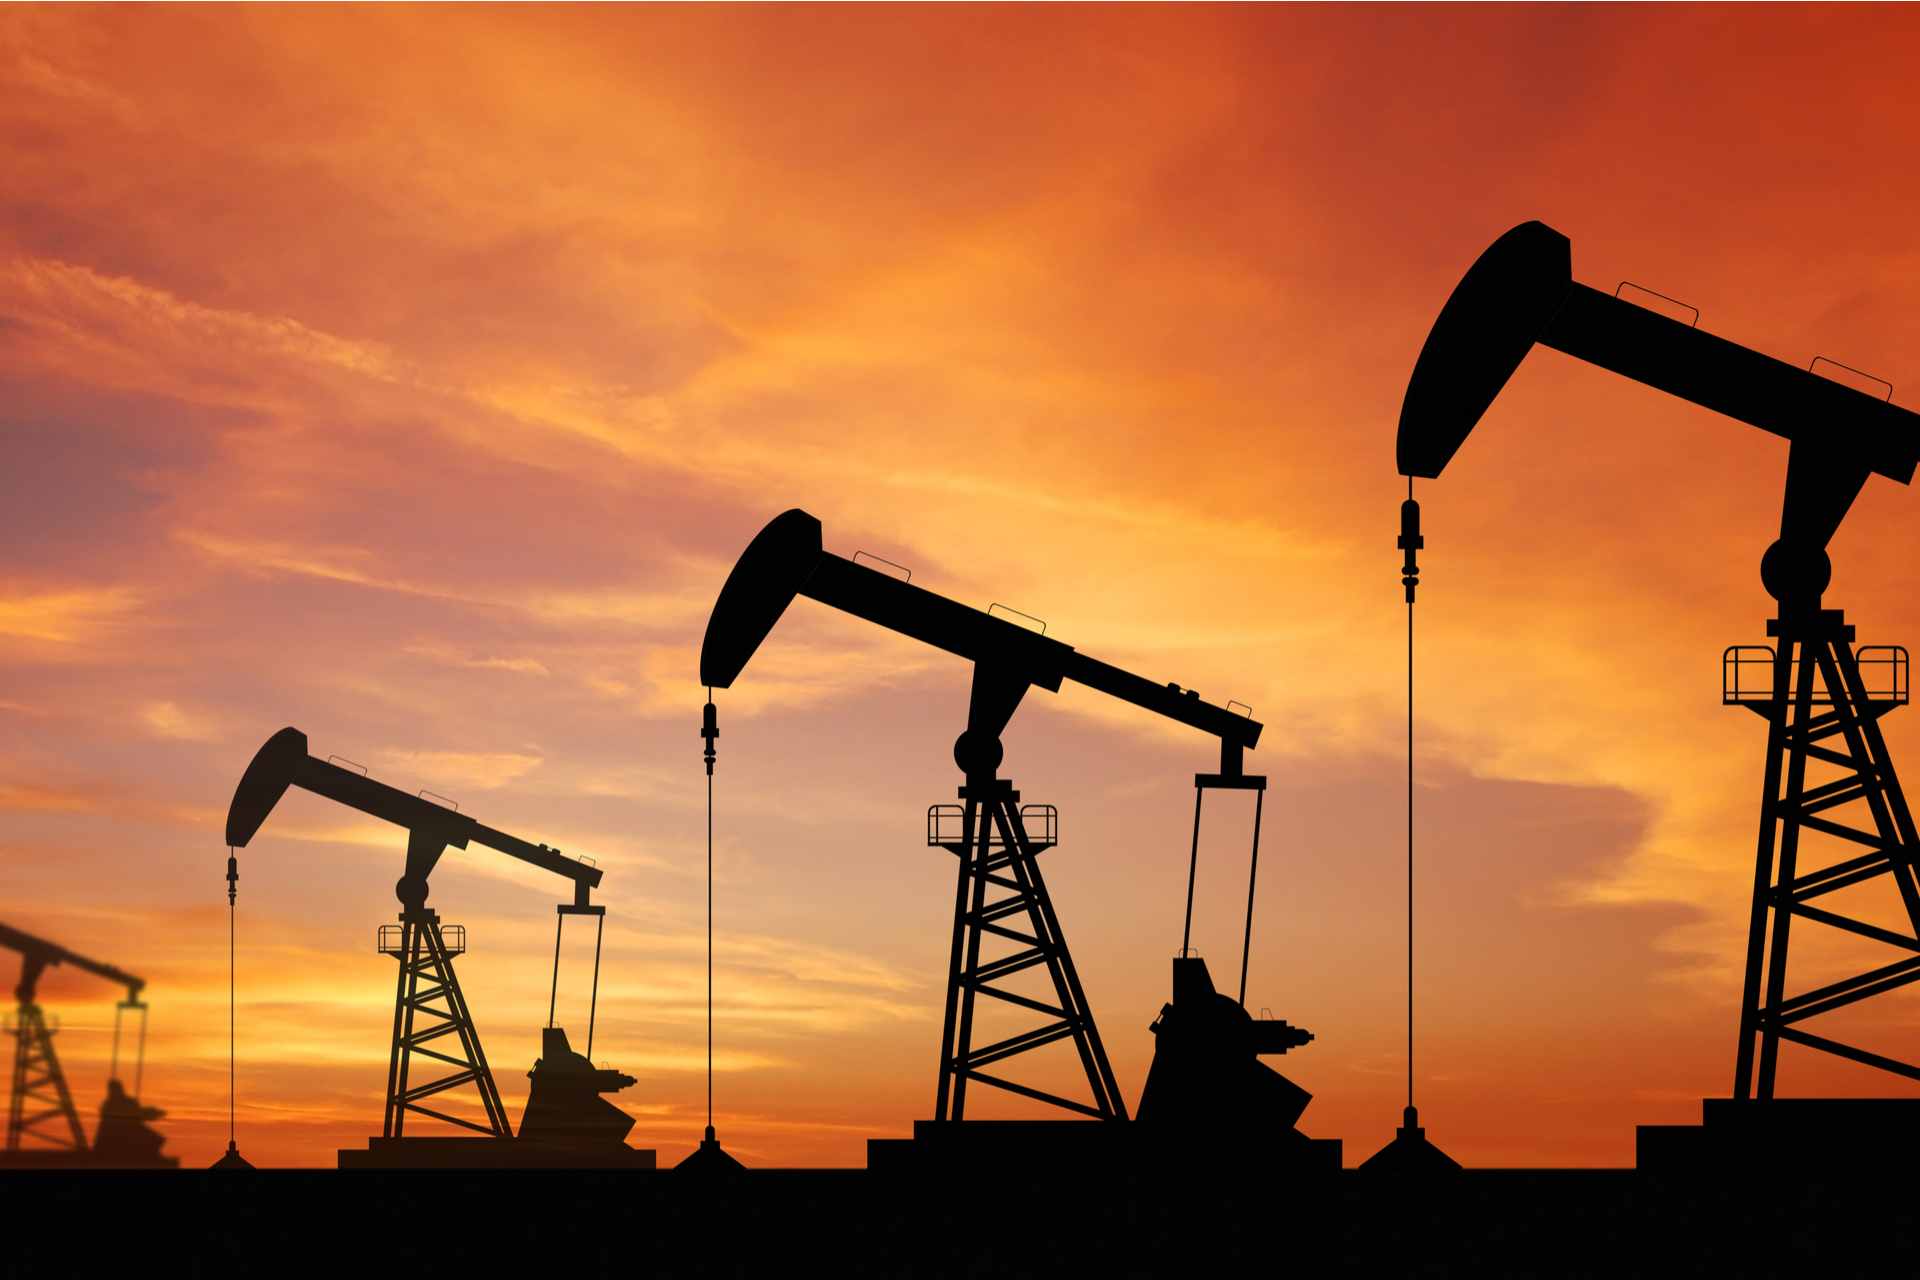 Commodity weekly: Oil and metals trade lower as gas and coal tank